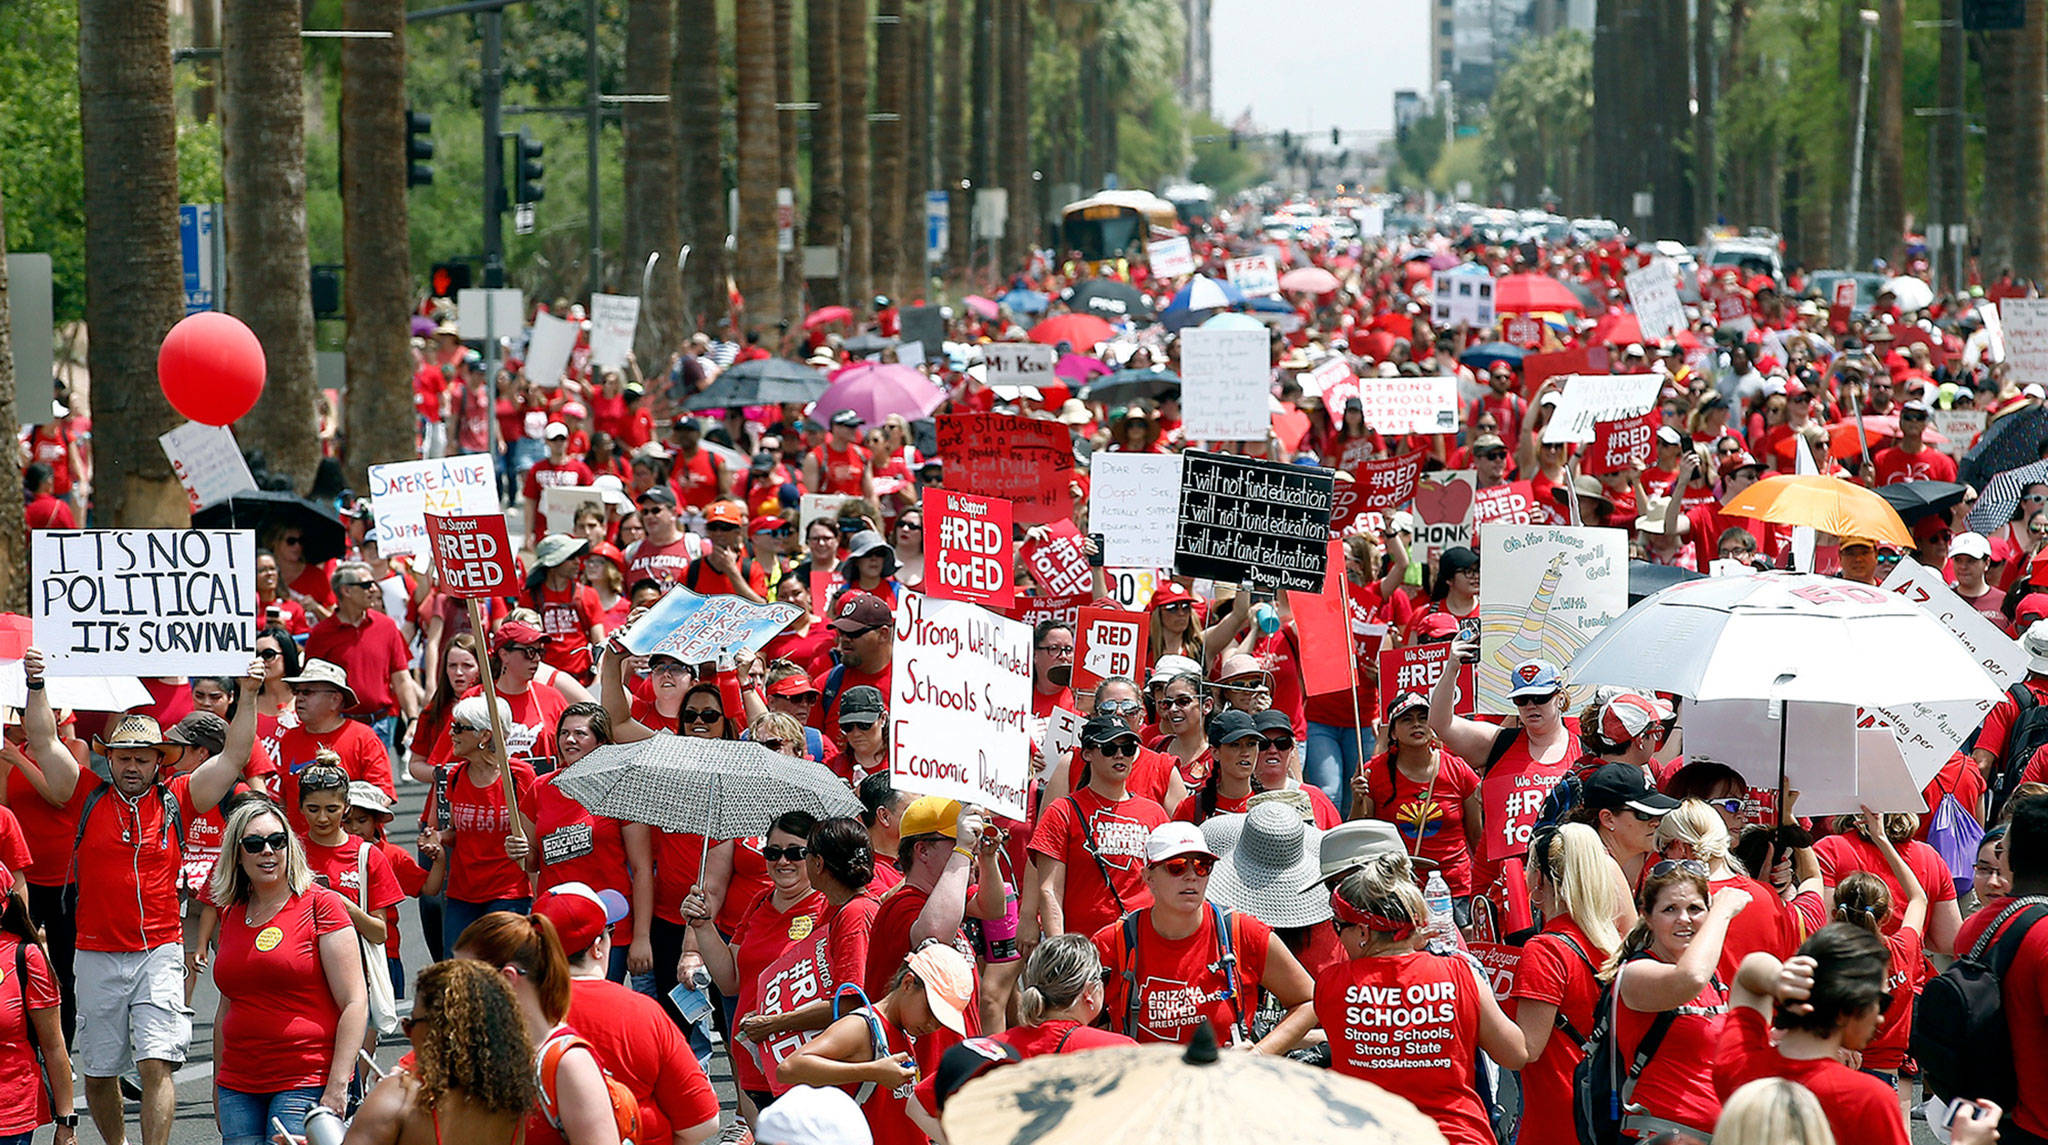 Thousands march to the Arizona Capitol to advocate for higher teacher pay and school funding on Thursday in Phoenix. (AP Photo/Ross D. Franklin)